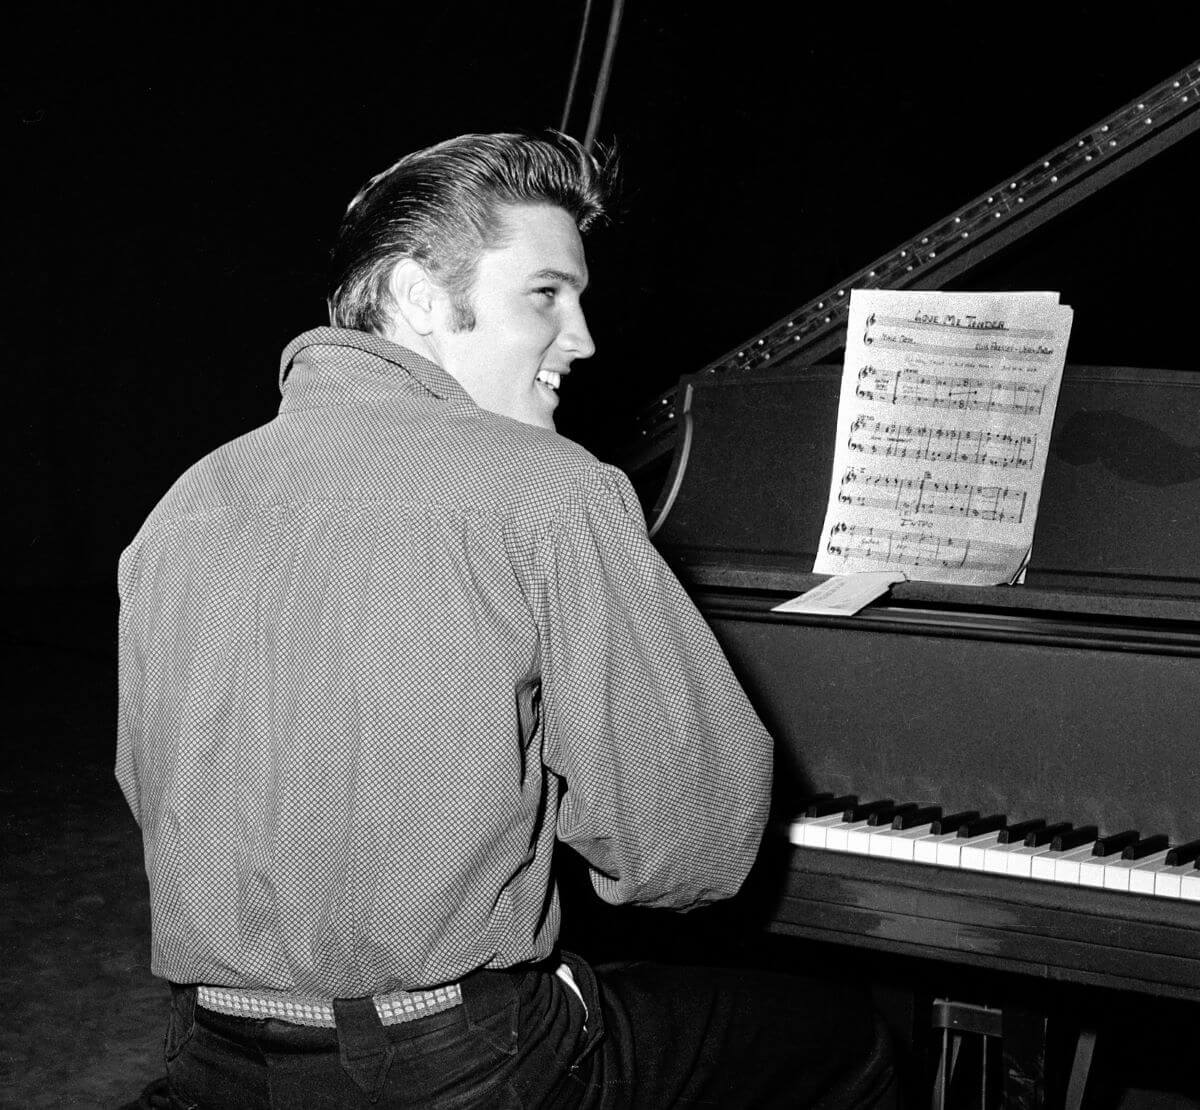 A black and white picture of Elvis Presley sitting at a piano with his back to the camera.